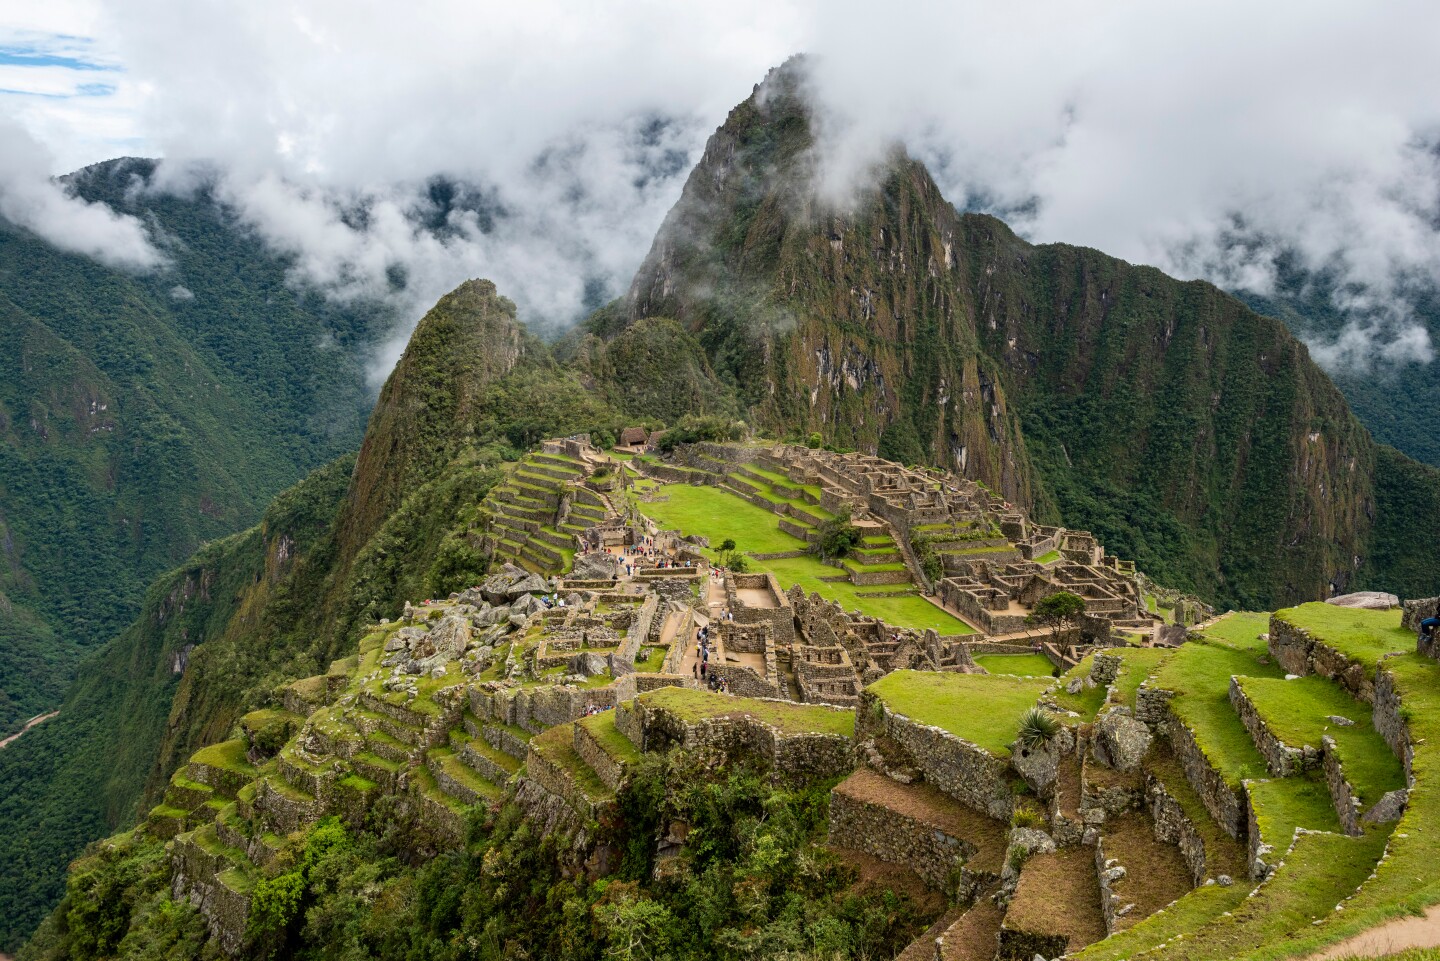 <h2>4. Machu Picchu</h2> <p><i>Peru</i><br> Located in the Peruvian Andes at nearly 8,000 feet above sea level, <a class="Link" href="https://www.afar.com/magazine/how-to-see-machu-picchu-tours-hikes-and-travel-tips" rel="noopener">Machu Picchu</a> cascades down a dramatic mountain spine surrounded by the Sacred Valley’s jagged peaks. Millions of visitors <a class="Link" href="https://www.afar.com/magazine/the-true-magic-of-machu-picchu-isnt-where-you-think-it-is" rel="noopener">flock to this UNESCO World Heritage site</a> each year to see the terraces and classical dry-stone buildings of the citadel. While it is recognized as one of the top historic, World Heritage sites, Machu Picchu had a short life span. It was built by the Incas around 1450 but abandoned a century later during the Spanish conquest.</p> <h3>How to visit</h3> <p>You can reach Aguas Calientes, the nearest town to Machu Picchu, by train from Cusco. Inca Rail, PeruRail, and the more luxurious Belmond Hiram Bingham train have daily service between the two destinations; the journey takes more than three hours. The <a class="Link" href="https://www.afar.com/places/inkaterra-macchu-picchu-pueblo-hotel-aguas-calientes" rel="noopener">Inkaterra Machu Picchu Pueblo Hotel</a> is a four-minute walk from the train station and looks like a village with terraced gardens, stone pathways, and guest rooms in adobe casitas.</p> <p>Another way to visit Machu Picchu is to go on a guided hike of the famous Inca Trail, which can be booked through various tour operators in Cusco. <a class="Link" href="https://tuboleto.cultura.pe" rel="noopener">Entry tickets</a> cost approximately $23 for adults and $20 for students and must be purchased in advance for a specific date and time slot. </p>